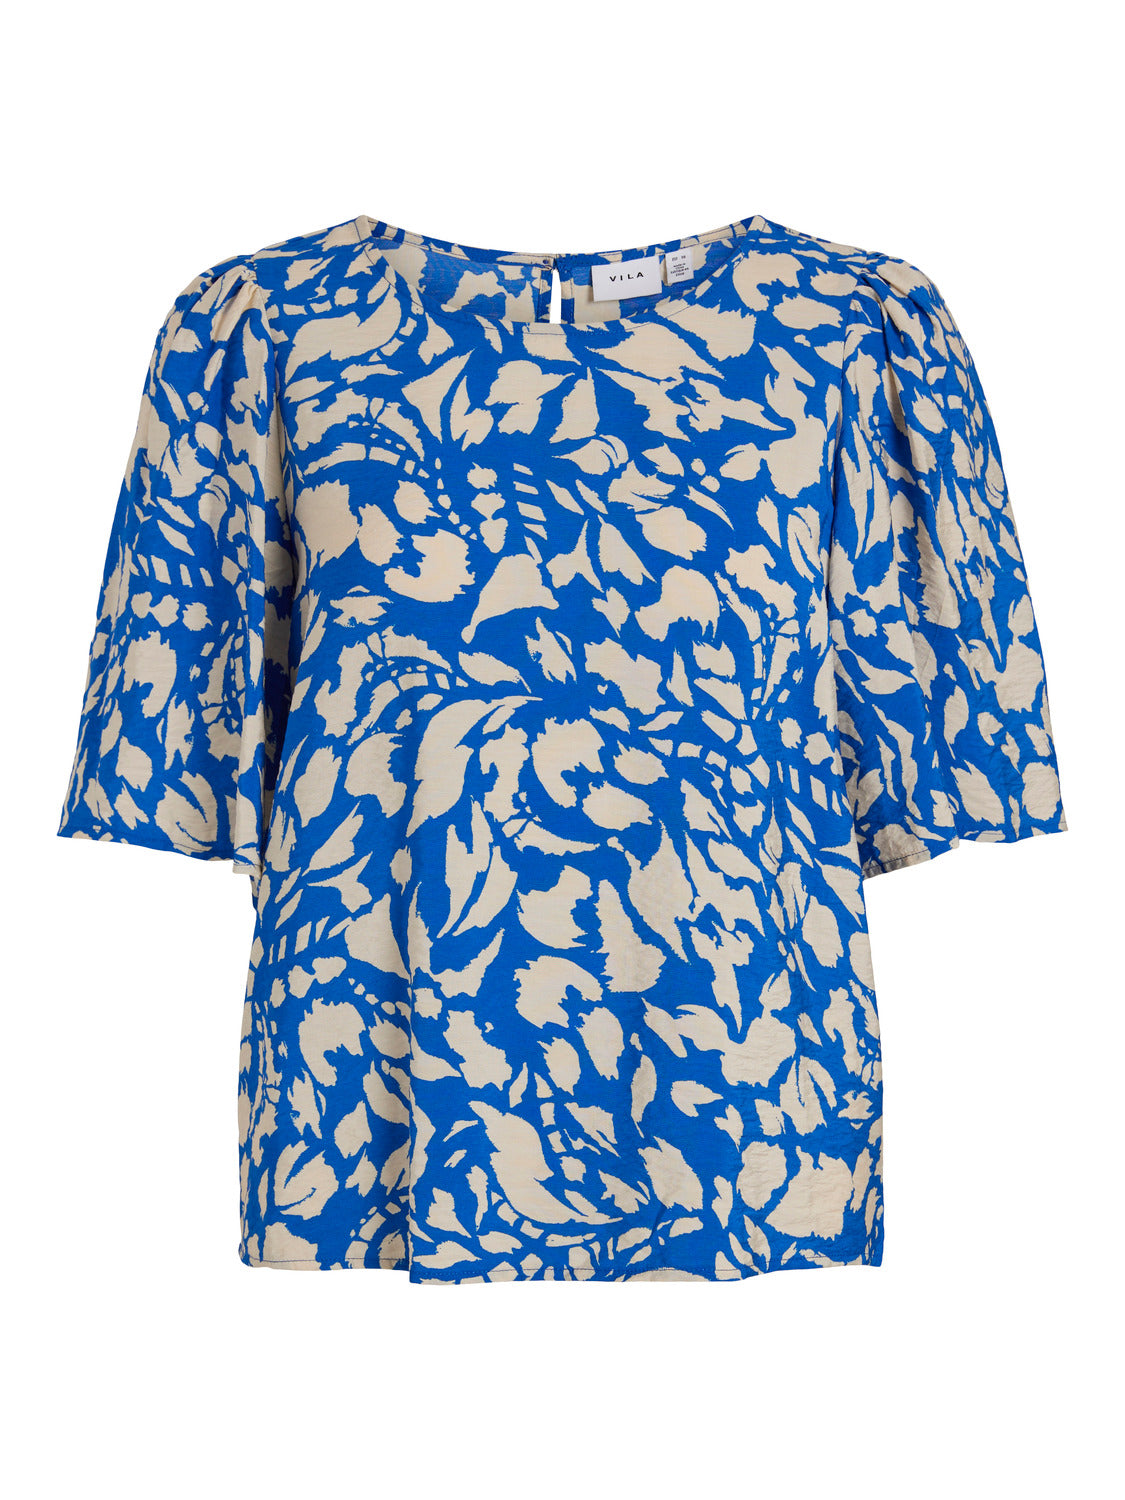 VIALLY T-Shirts & Tops - Lapis Blue